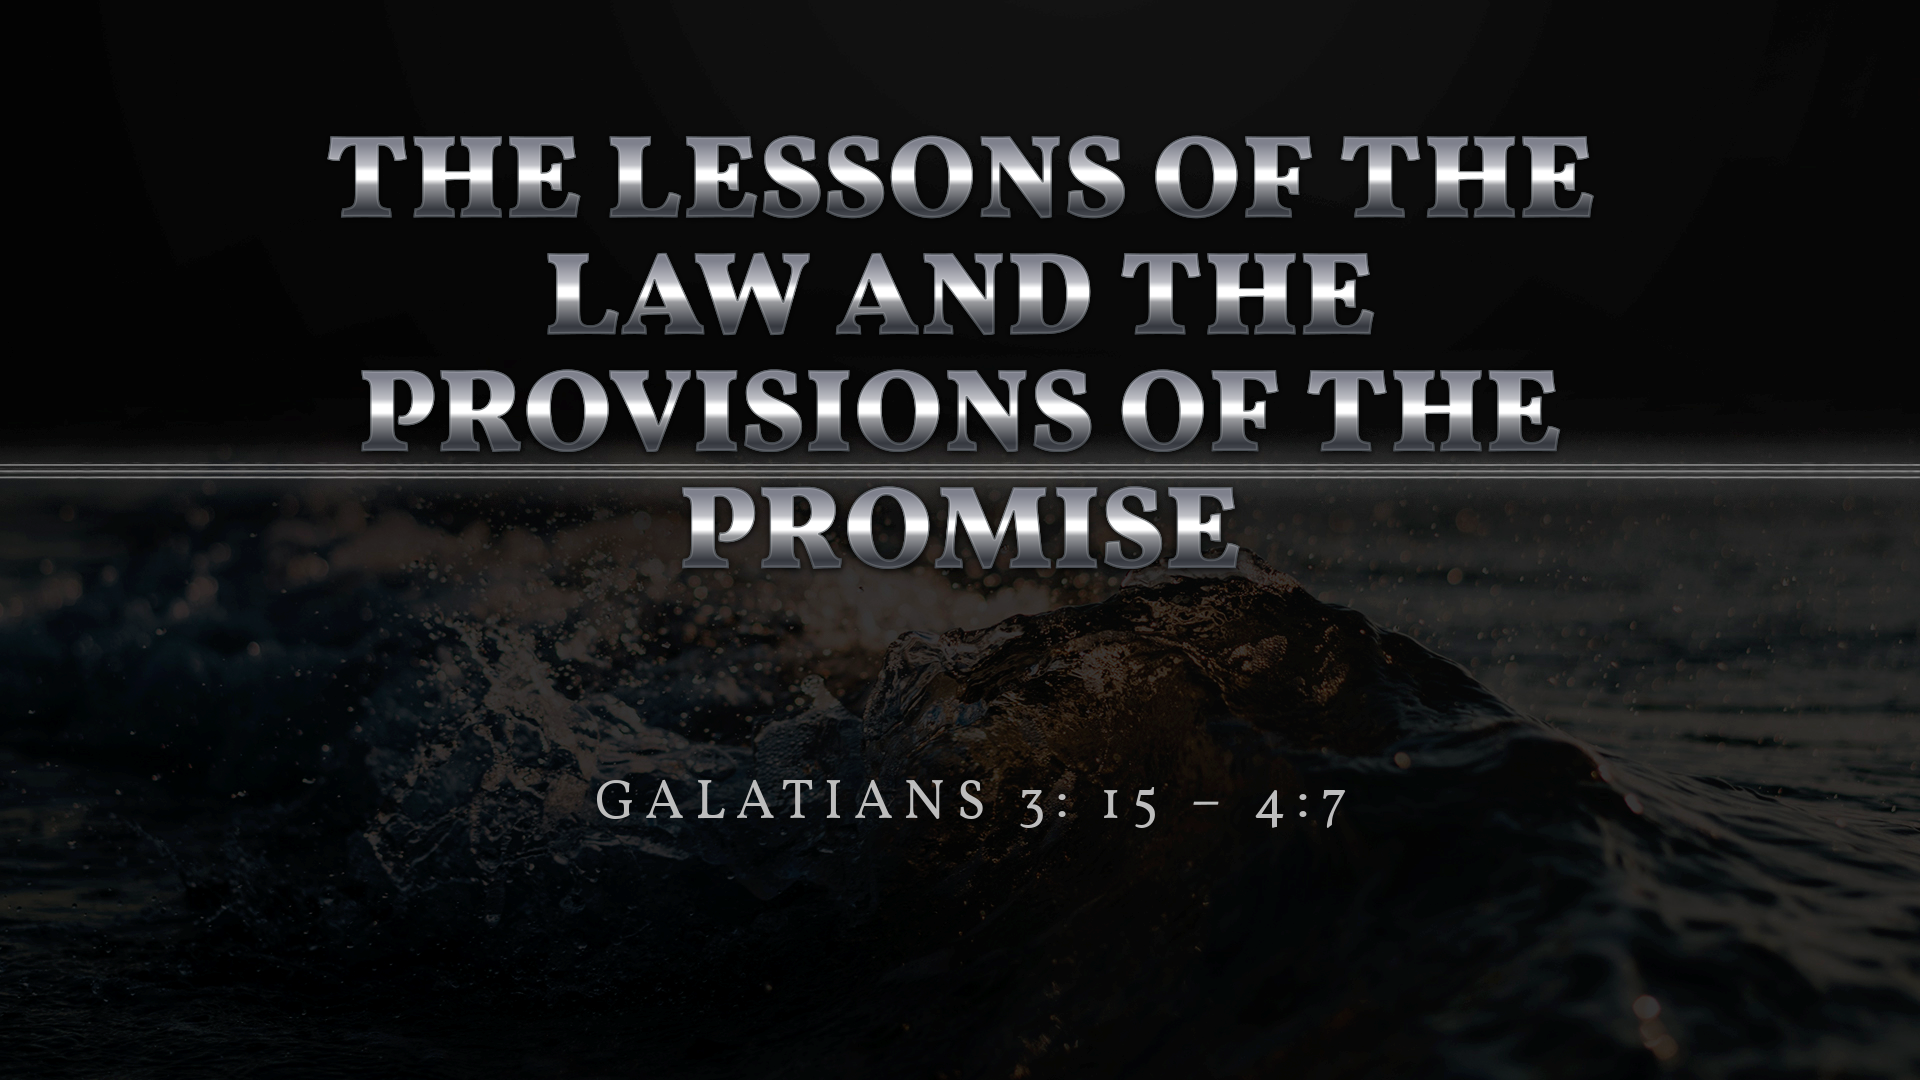 Oct 10, 2021 - The Lessons of the Law and the Provisions of the Promise  (Video) - Galatians 3:15 - 4:7